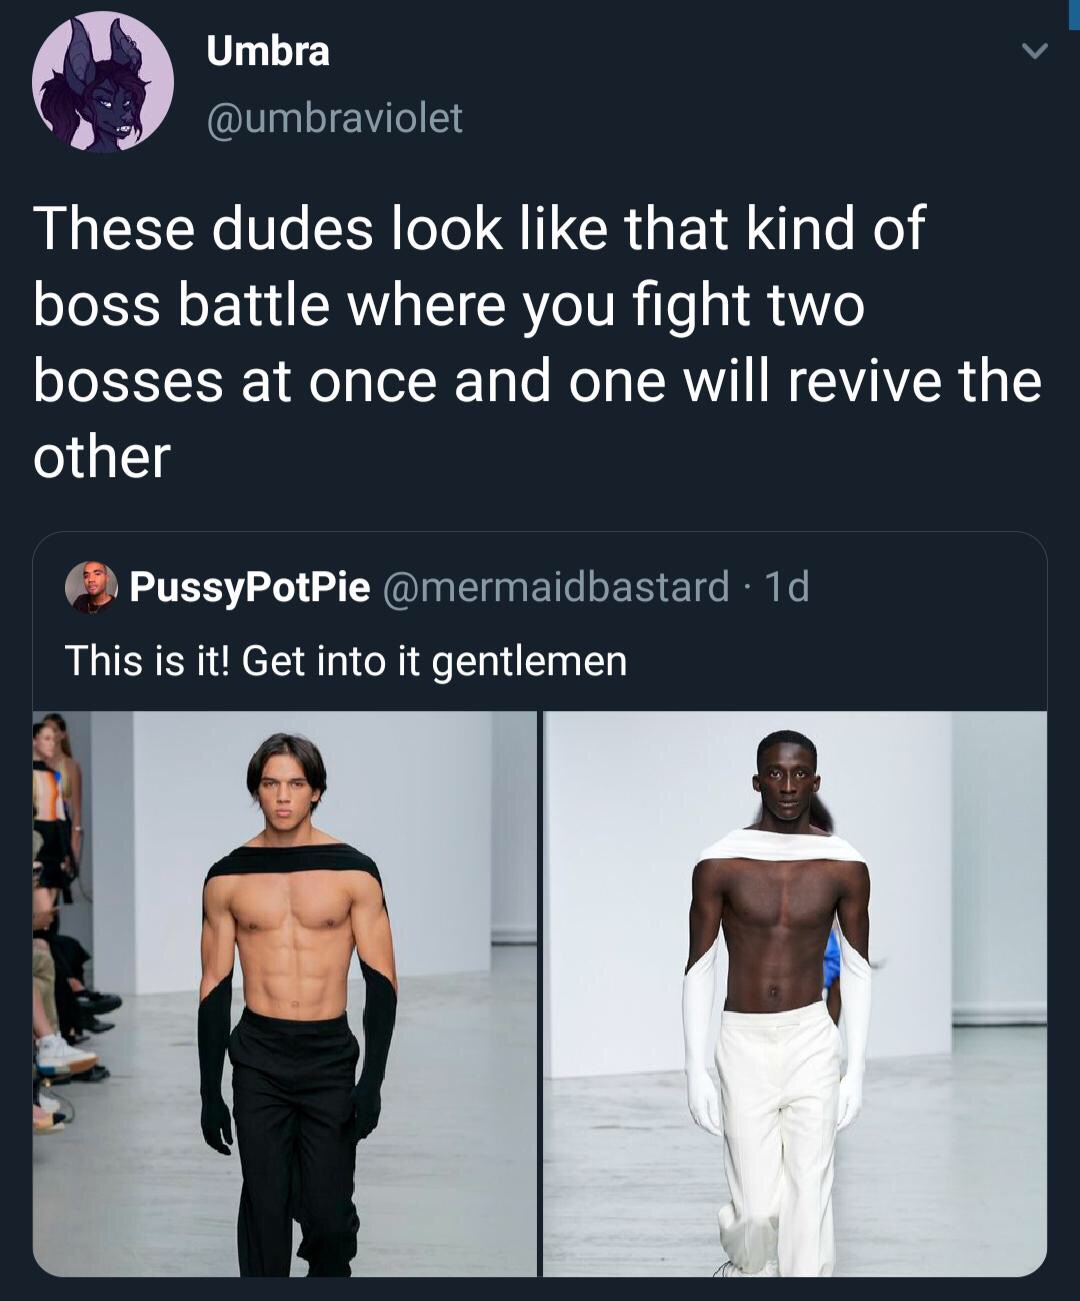 stand user can be anywhere meme - Umbra These dudes look that kind of boss battle where you fight two bosses at once and one will revive the other PussyPot Pie 1d This is it! Get into it gentlemen